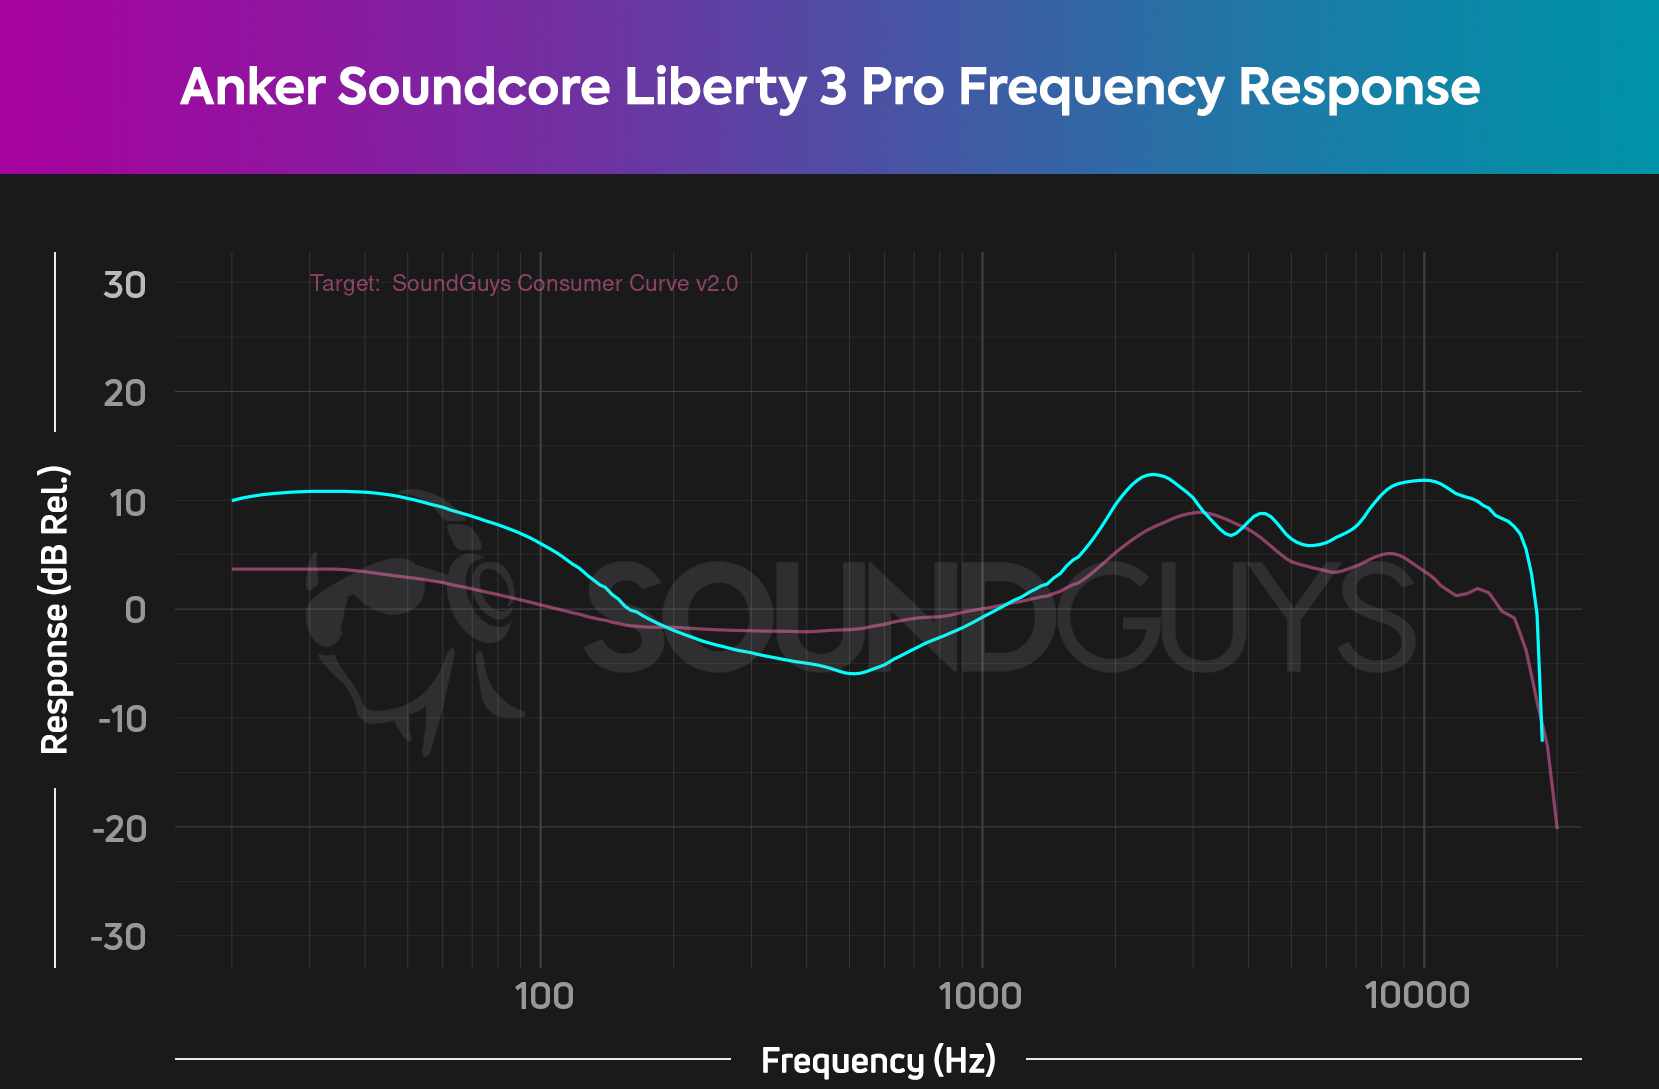 A chart showing the frequency response of the Anker Soundcore Liberty 3 Pro, with significantly more low-end frequency volume compared to our house consumer curve.